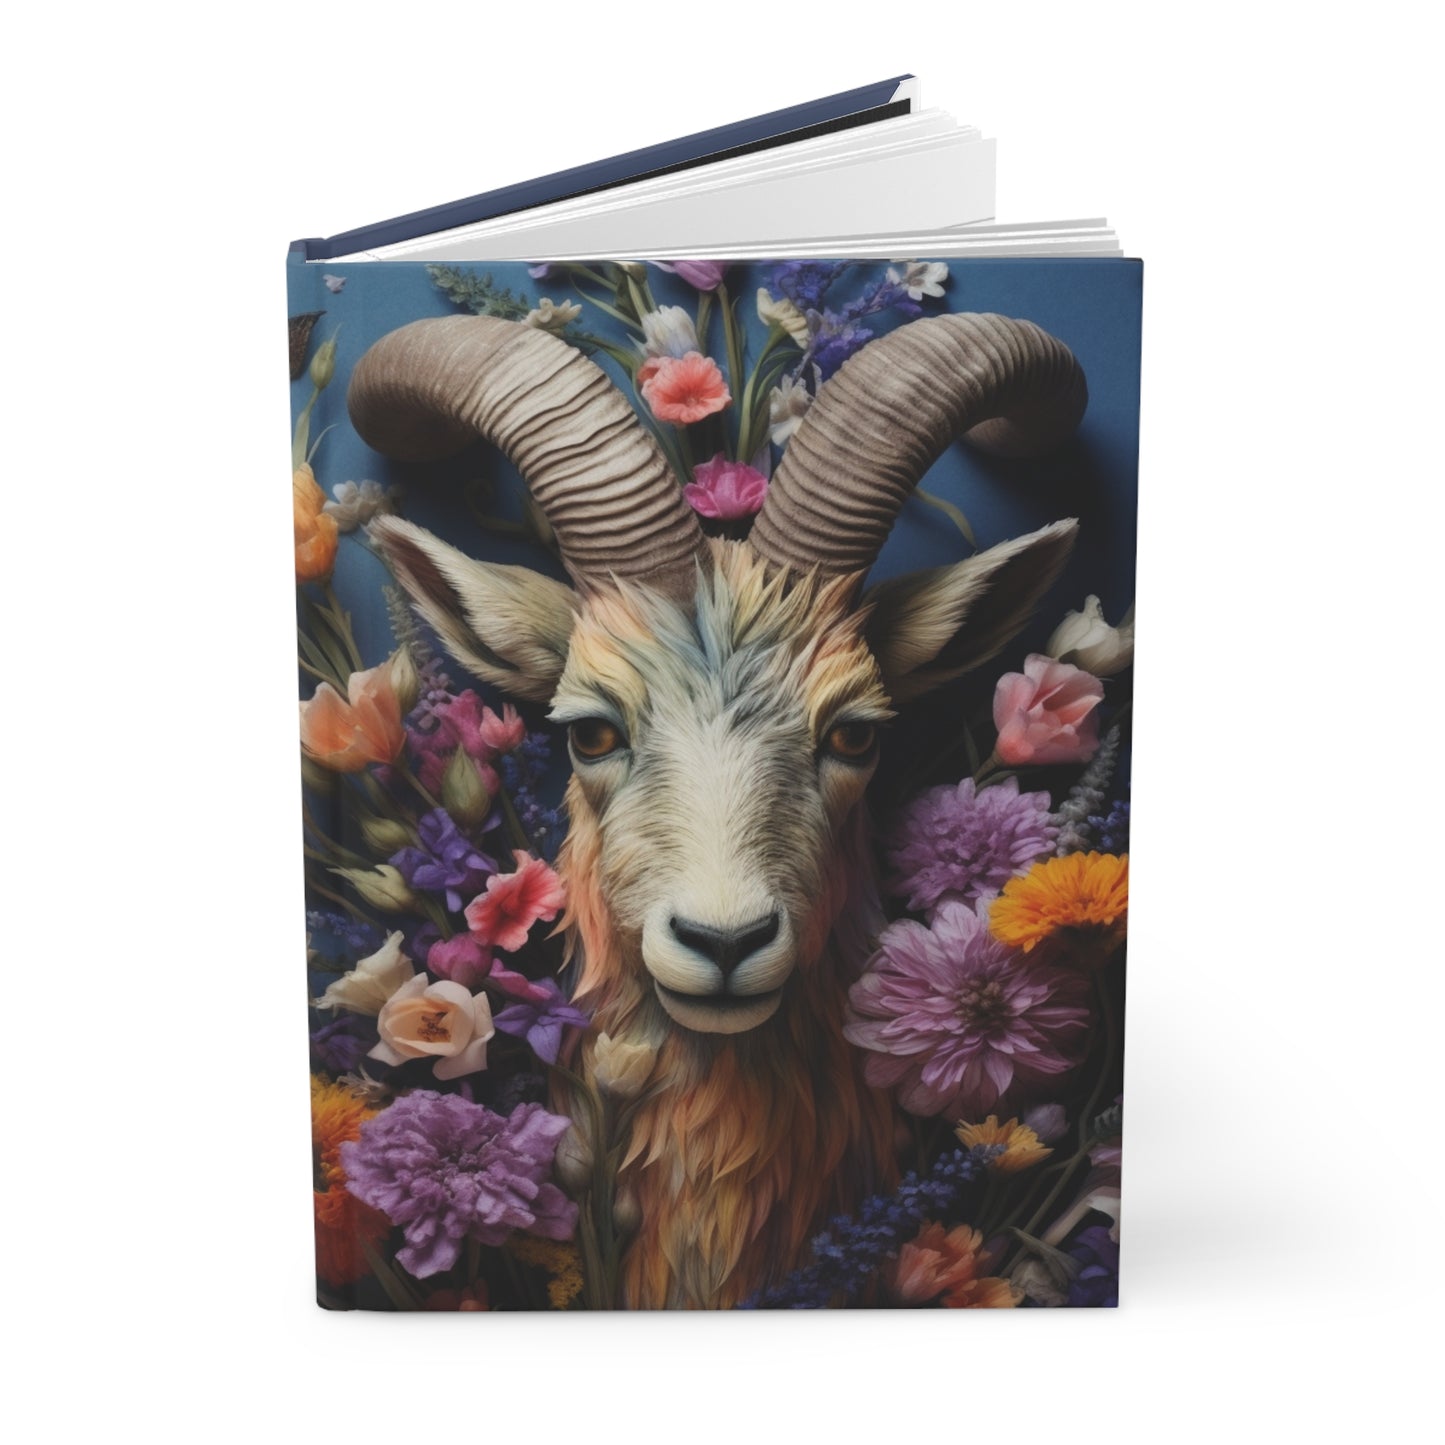 Floral Goat Hardcover Notebook, Lined Journal, Wellness Diary, Gratitude Journal, Self Care Planner, A5 Size, Unique Gift Idea